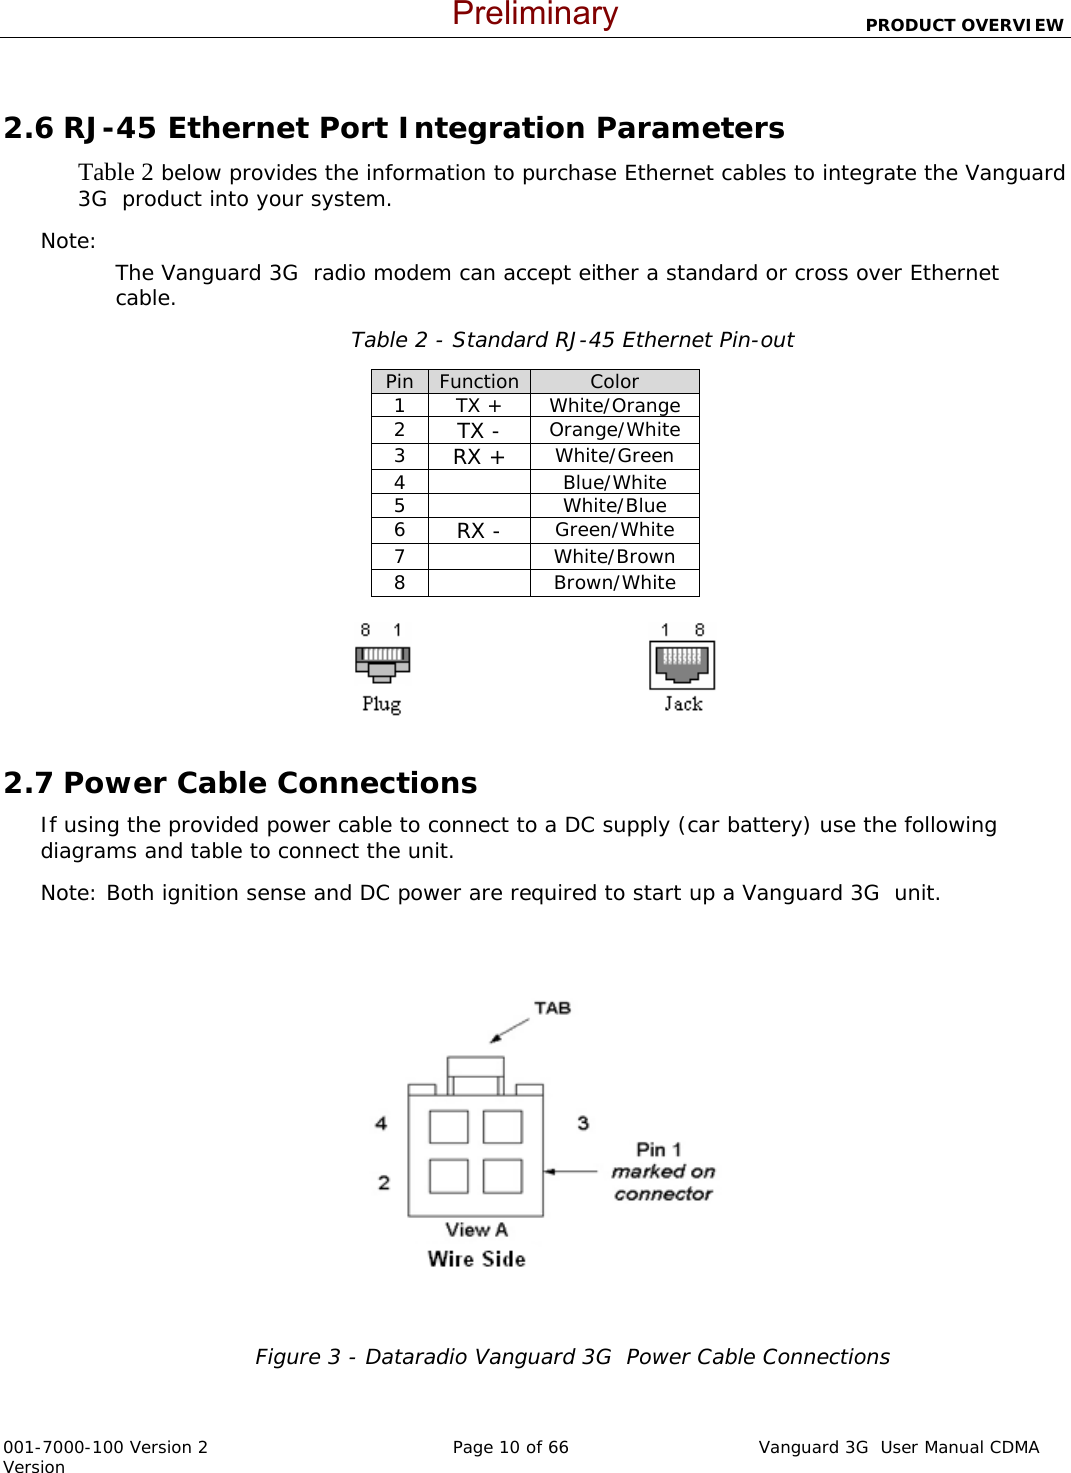                          PRODUCT OVERVIEW  001-7000-100 Version 2       Page 10 of 66       Vanguard 3G  User Manual CDMA Version  2.6 RJ-45 Ethernet Port Integration Parameters Table 2 below provides the information to purchase Ethernet cables to integrate the Vanguard 3G  product into your system.  Note:   The Vanguard 3G  radio modem can accept either a standard or cross over Ethernet cable.   Table 2 - Standard RJ-45 Ethernet Pin-out Pin  Function Color 1 TX + White/Orange 2  TX - Orange/White 3  RX + White/Green 4   Blue/White 5   White/Blue 6  RX - Green/White 7   White/Brown 8   Brown/White                                            2.7 Power Cable Connections If using the provided power cable to connect to a DC supply (car battery) use the following diagrams and table to connect the unit.   Note: Both ignition sense and DC power are required to start up a Vanguard 3G  unit.  Figure 3 - Dataradio Vanguard 3G  Power Cable Connections   Preliminary